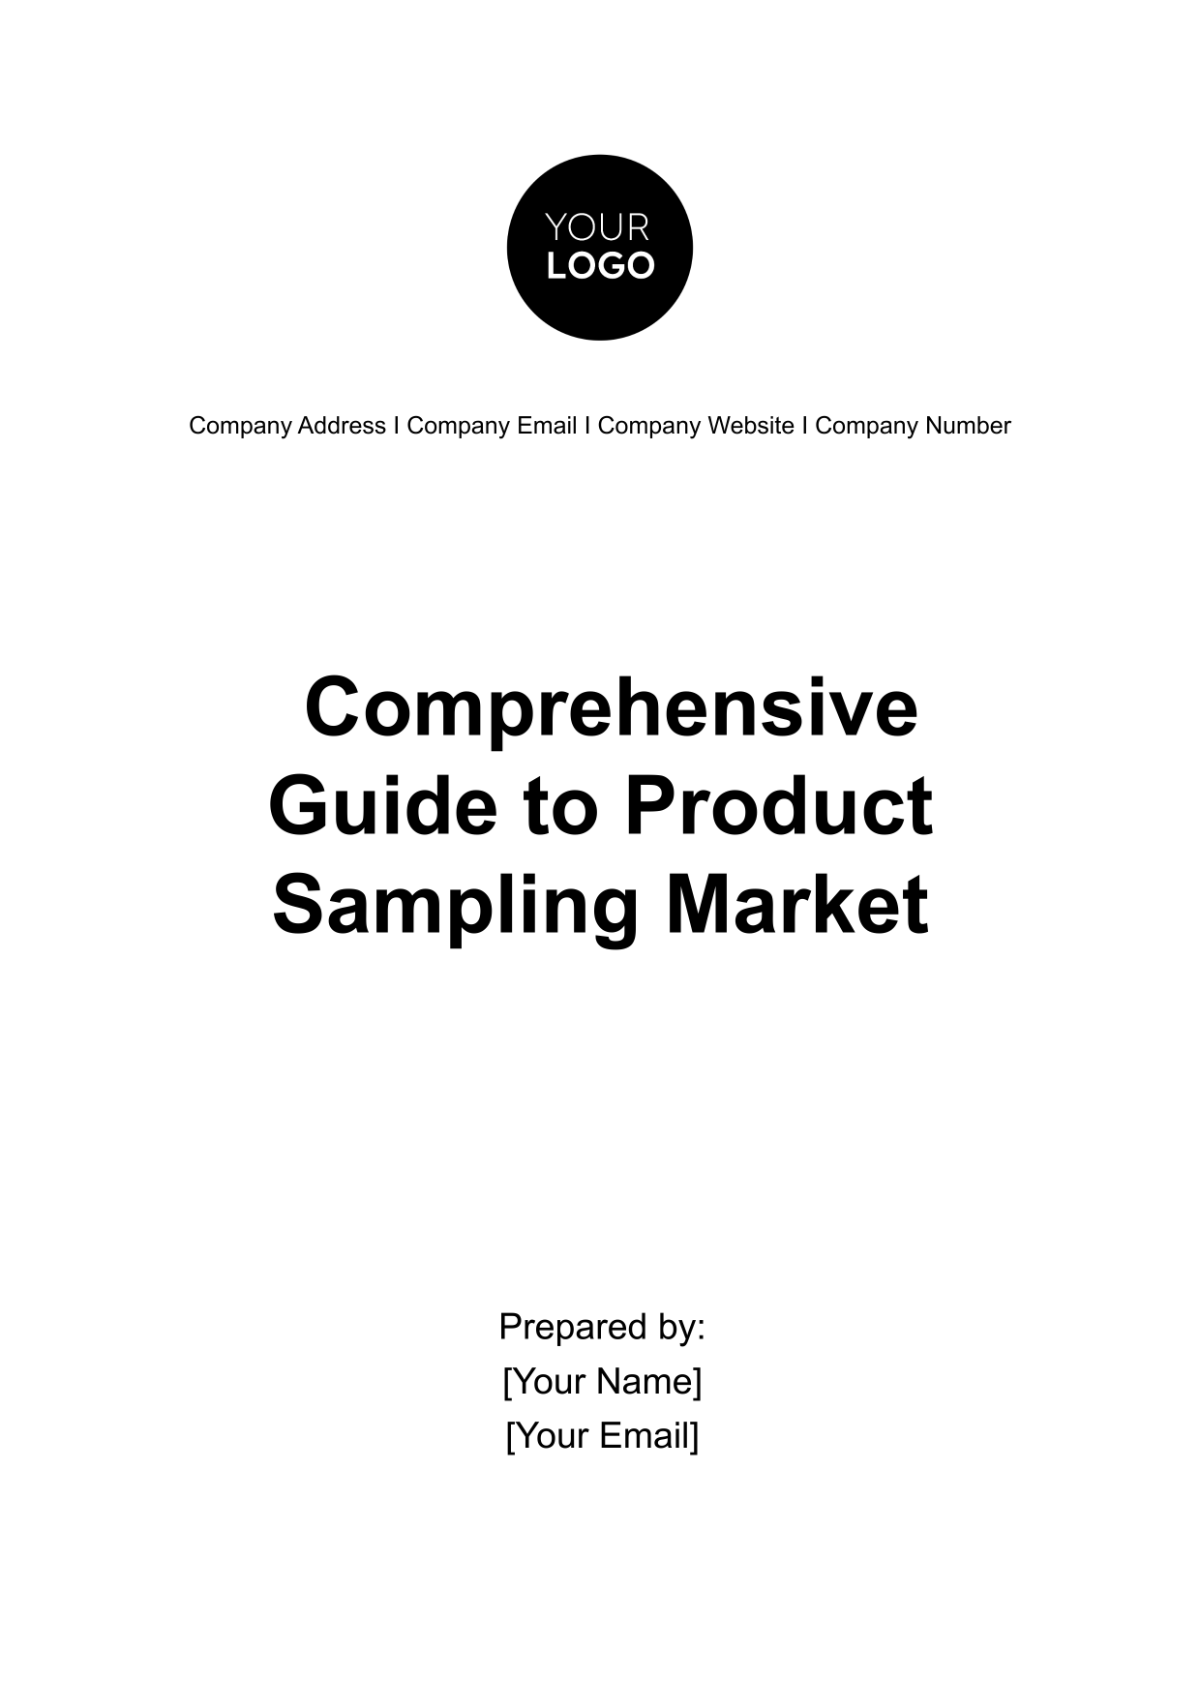 Marketing Comprehensive Guide to Product Sampling Template